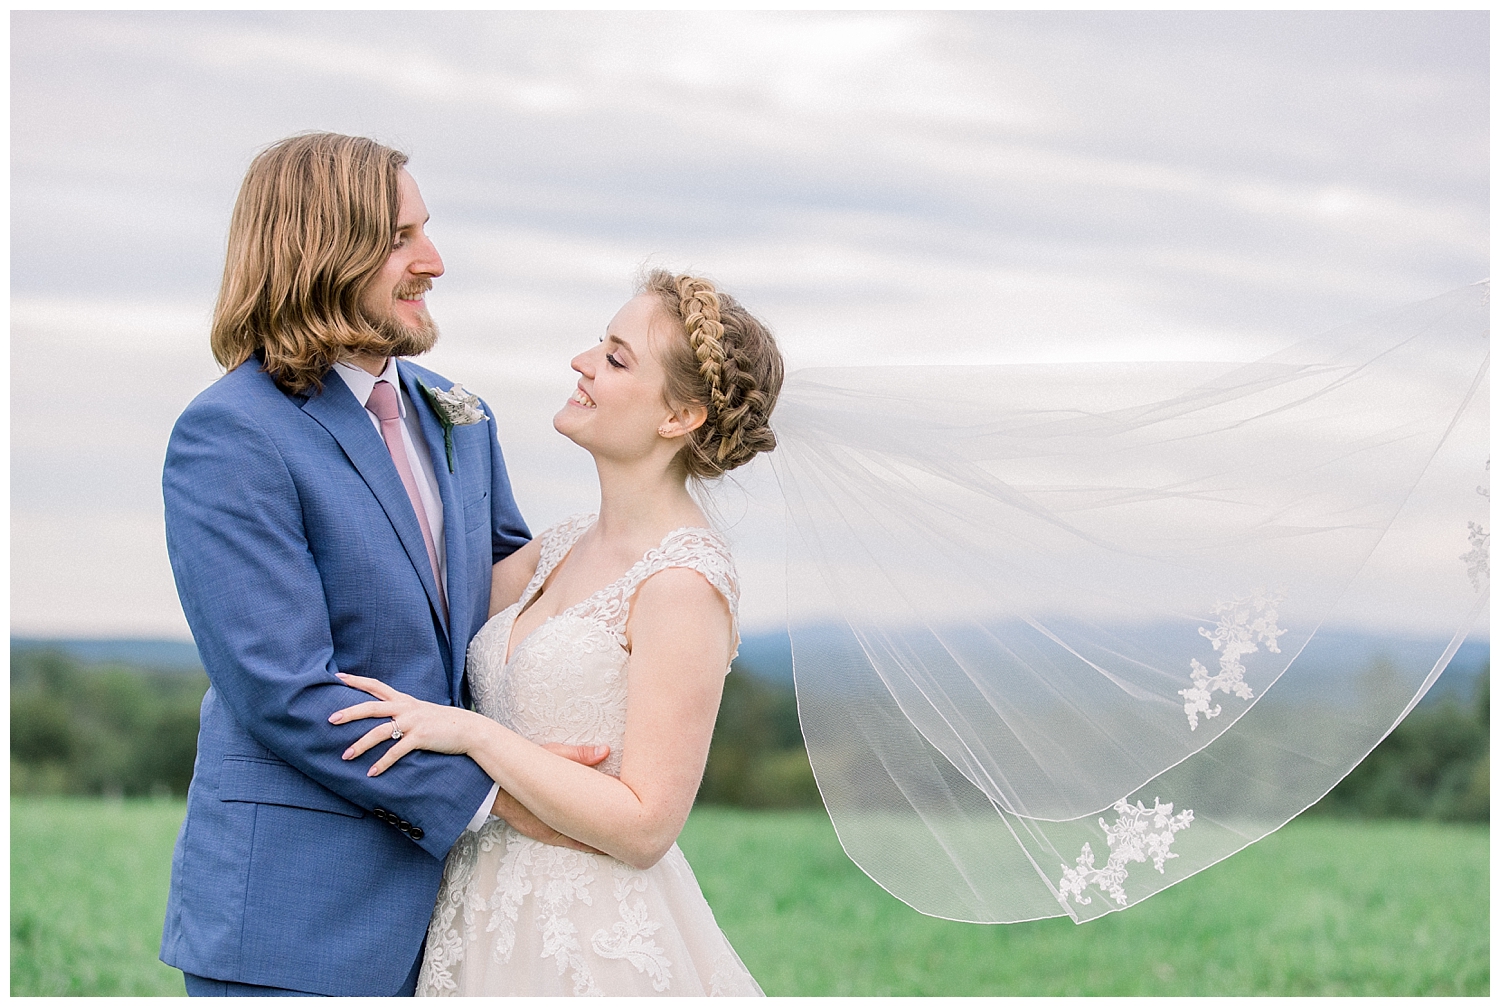 Goffstown, New Hampshire wedding at a private estate. Photography by Halie Olszowy.